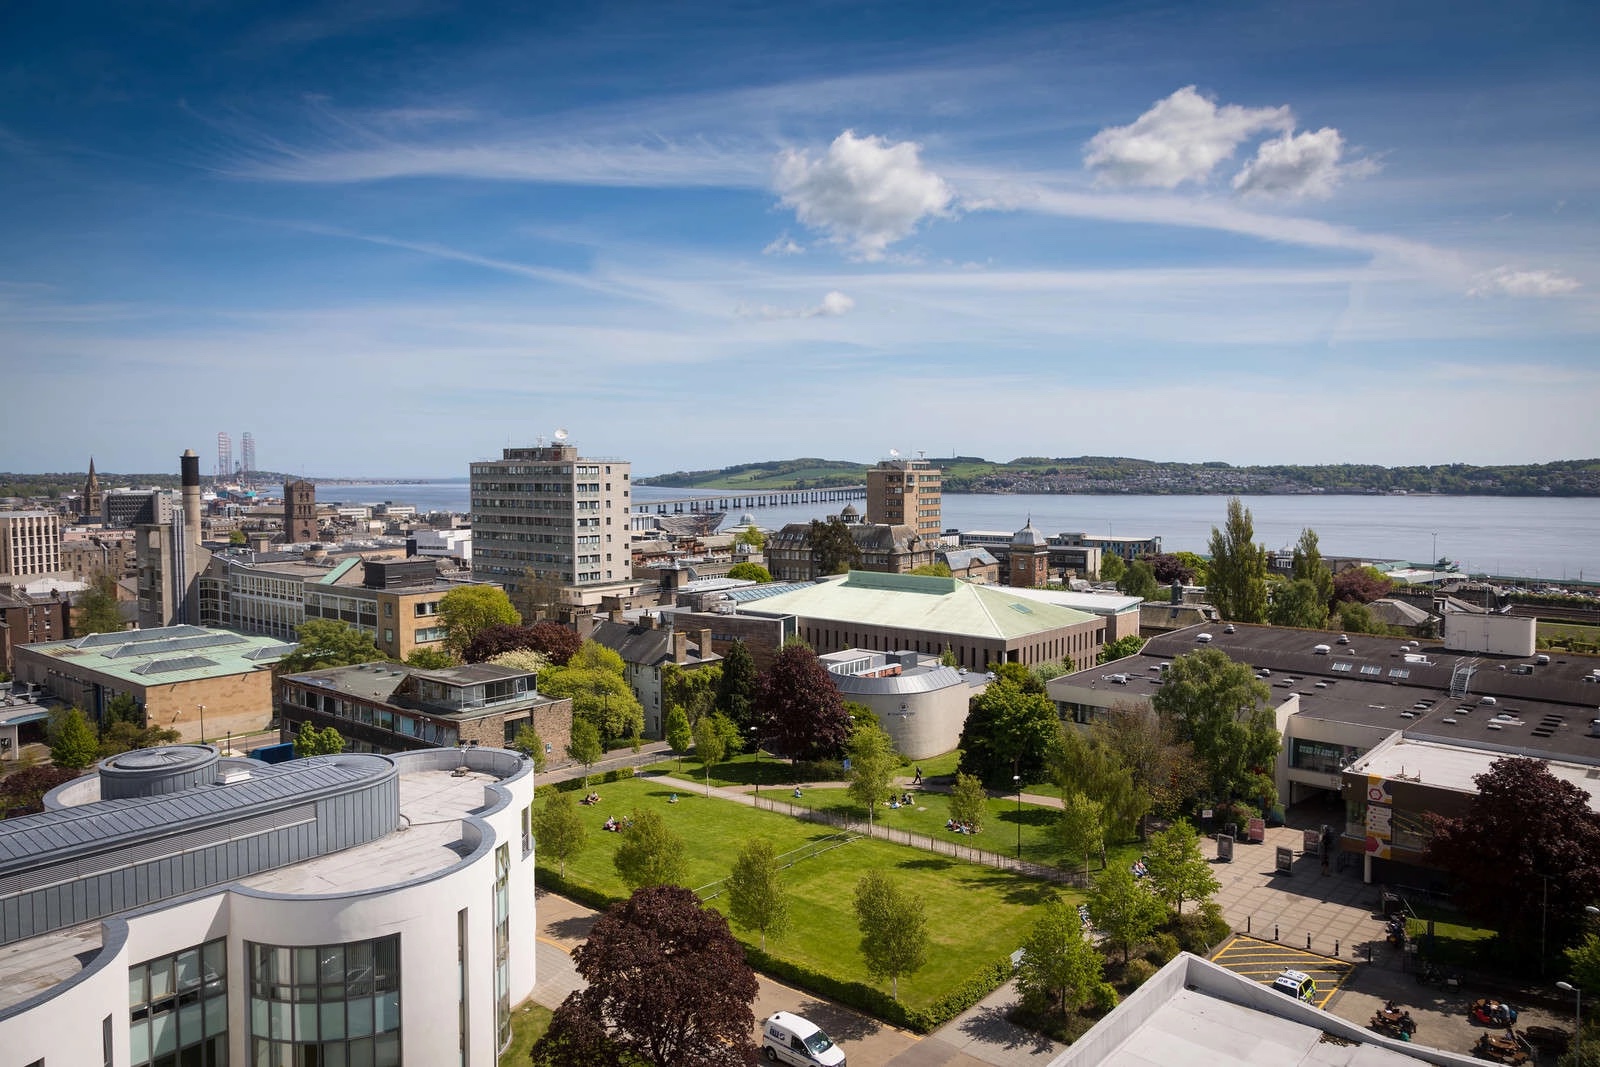 View of the campus looking towards Broughty Ferry and the River Tay